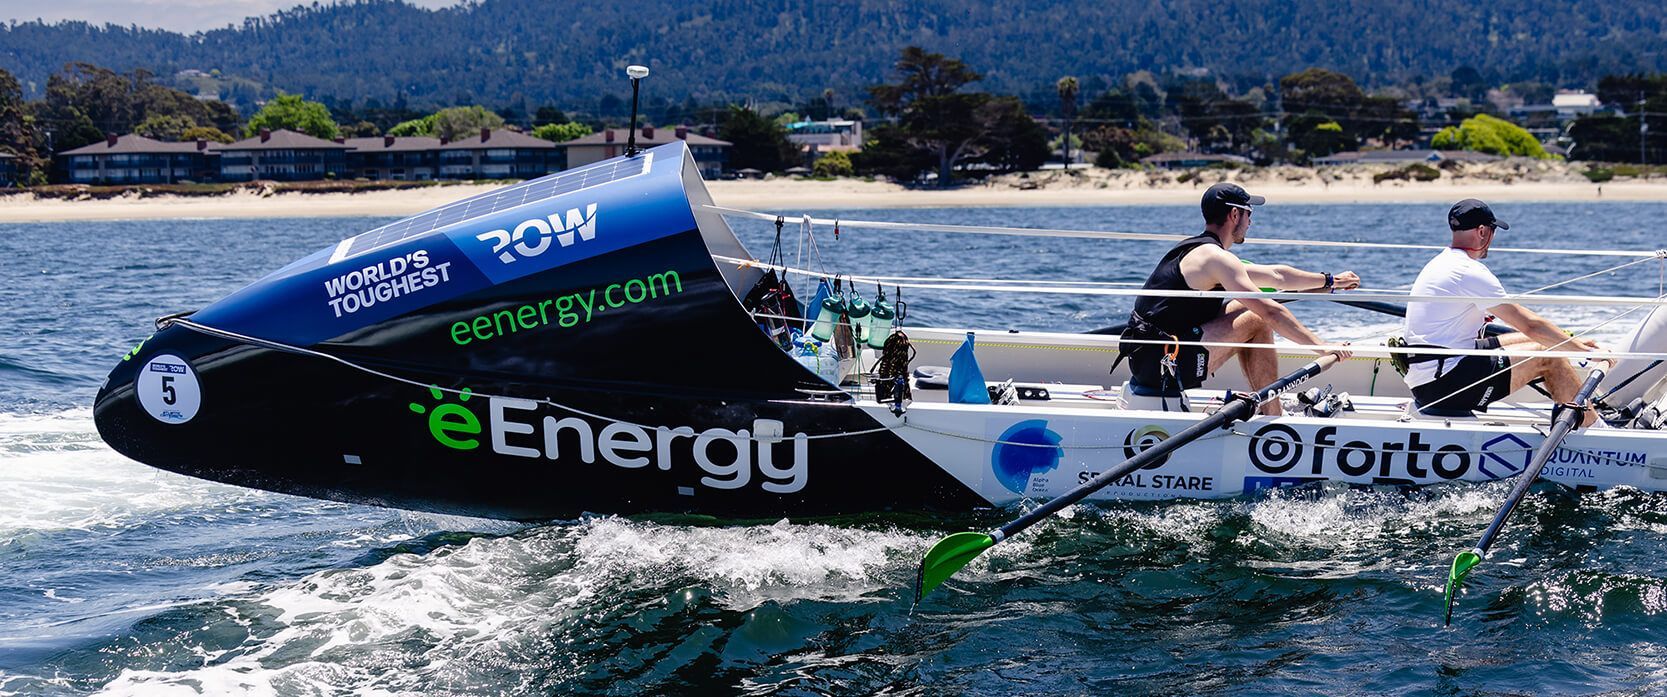 Ocean rowers on a training row for Worlds Toughest Row